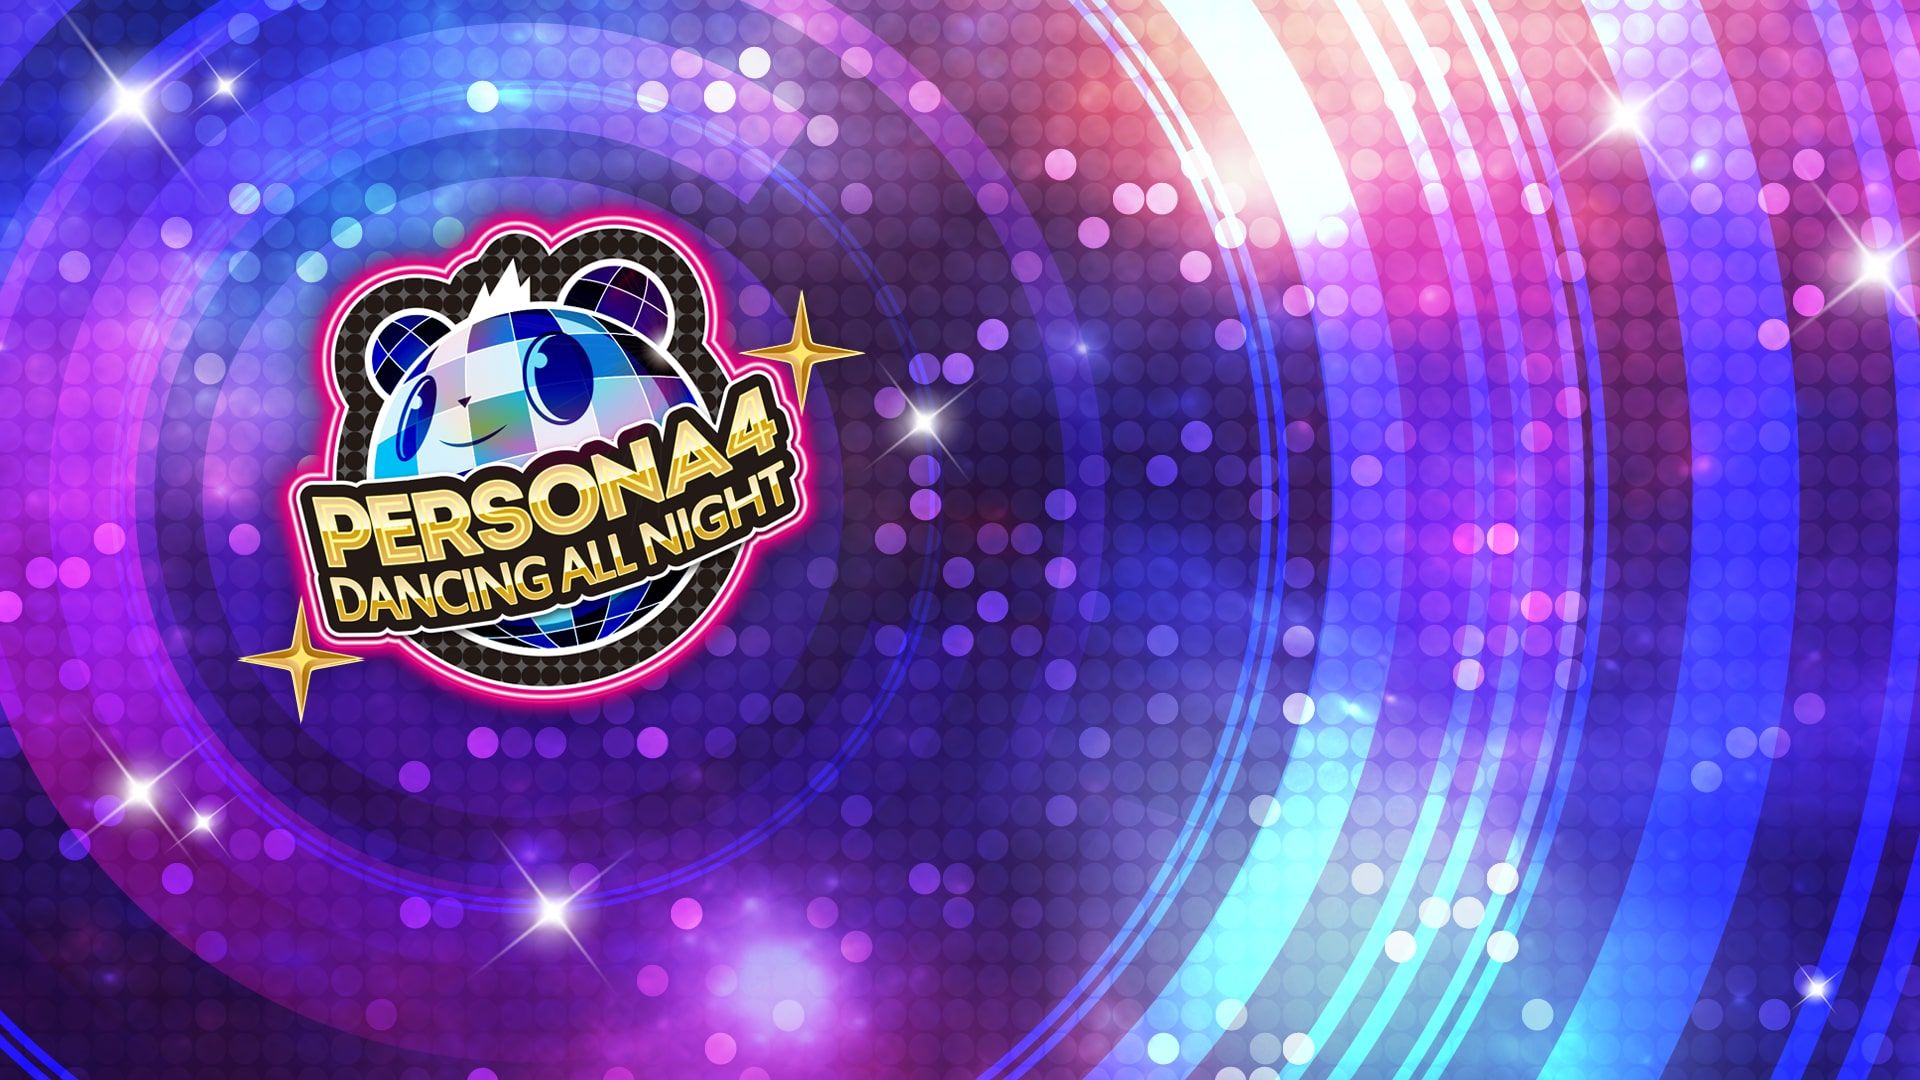 Persona 4 Dancing All Night cover image